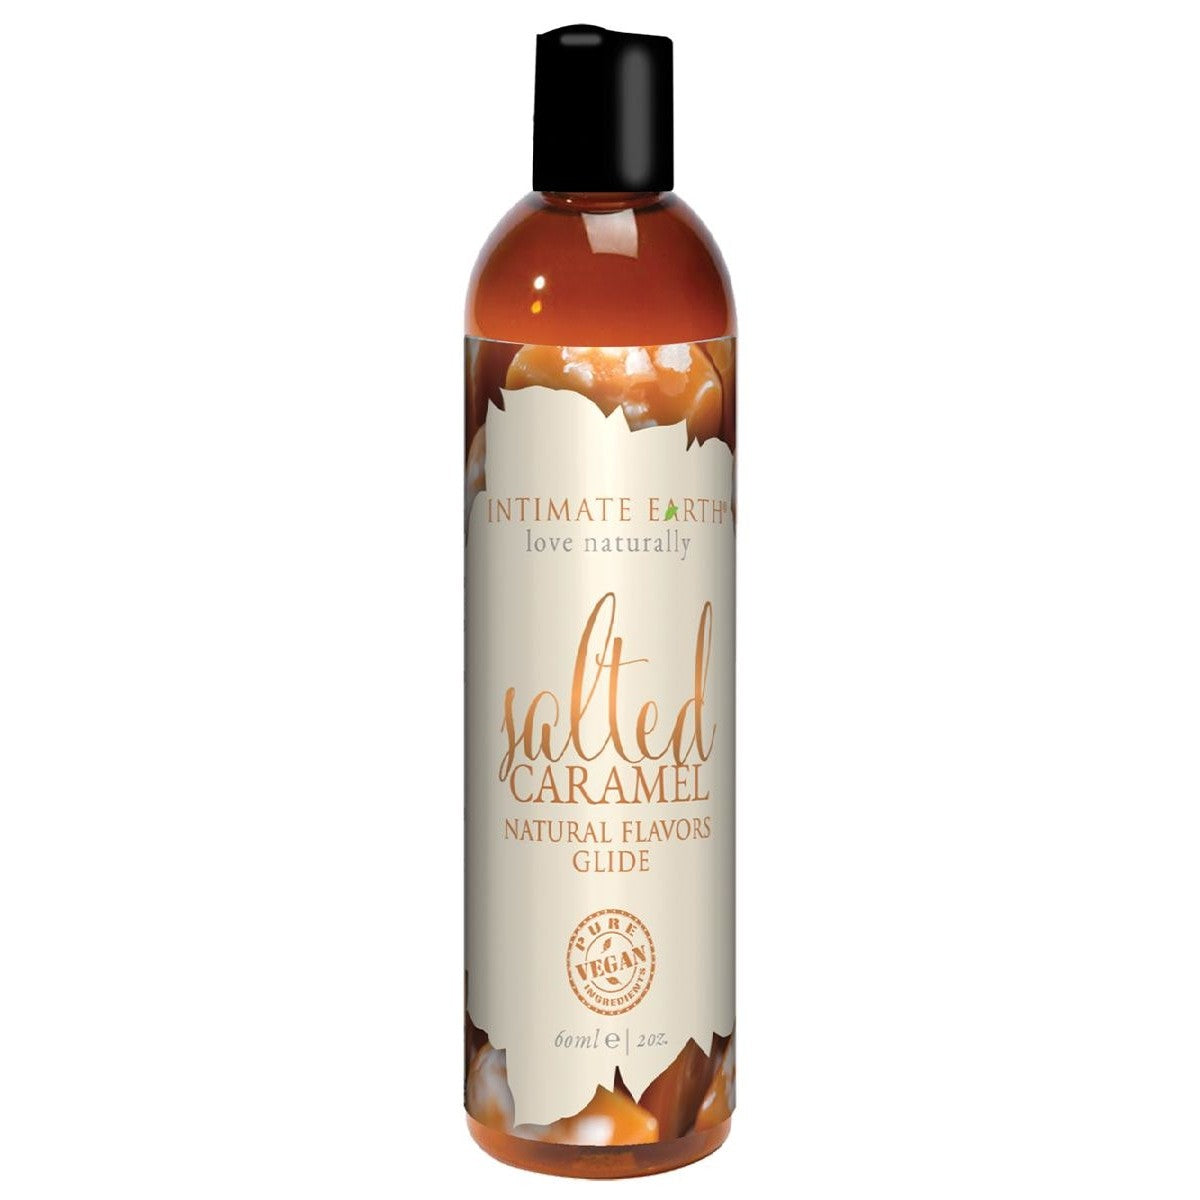 Intimate Earth Flavored Glide - Salted Caramel 2oz Intimates Adult Boutique